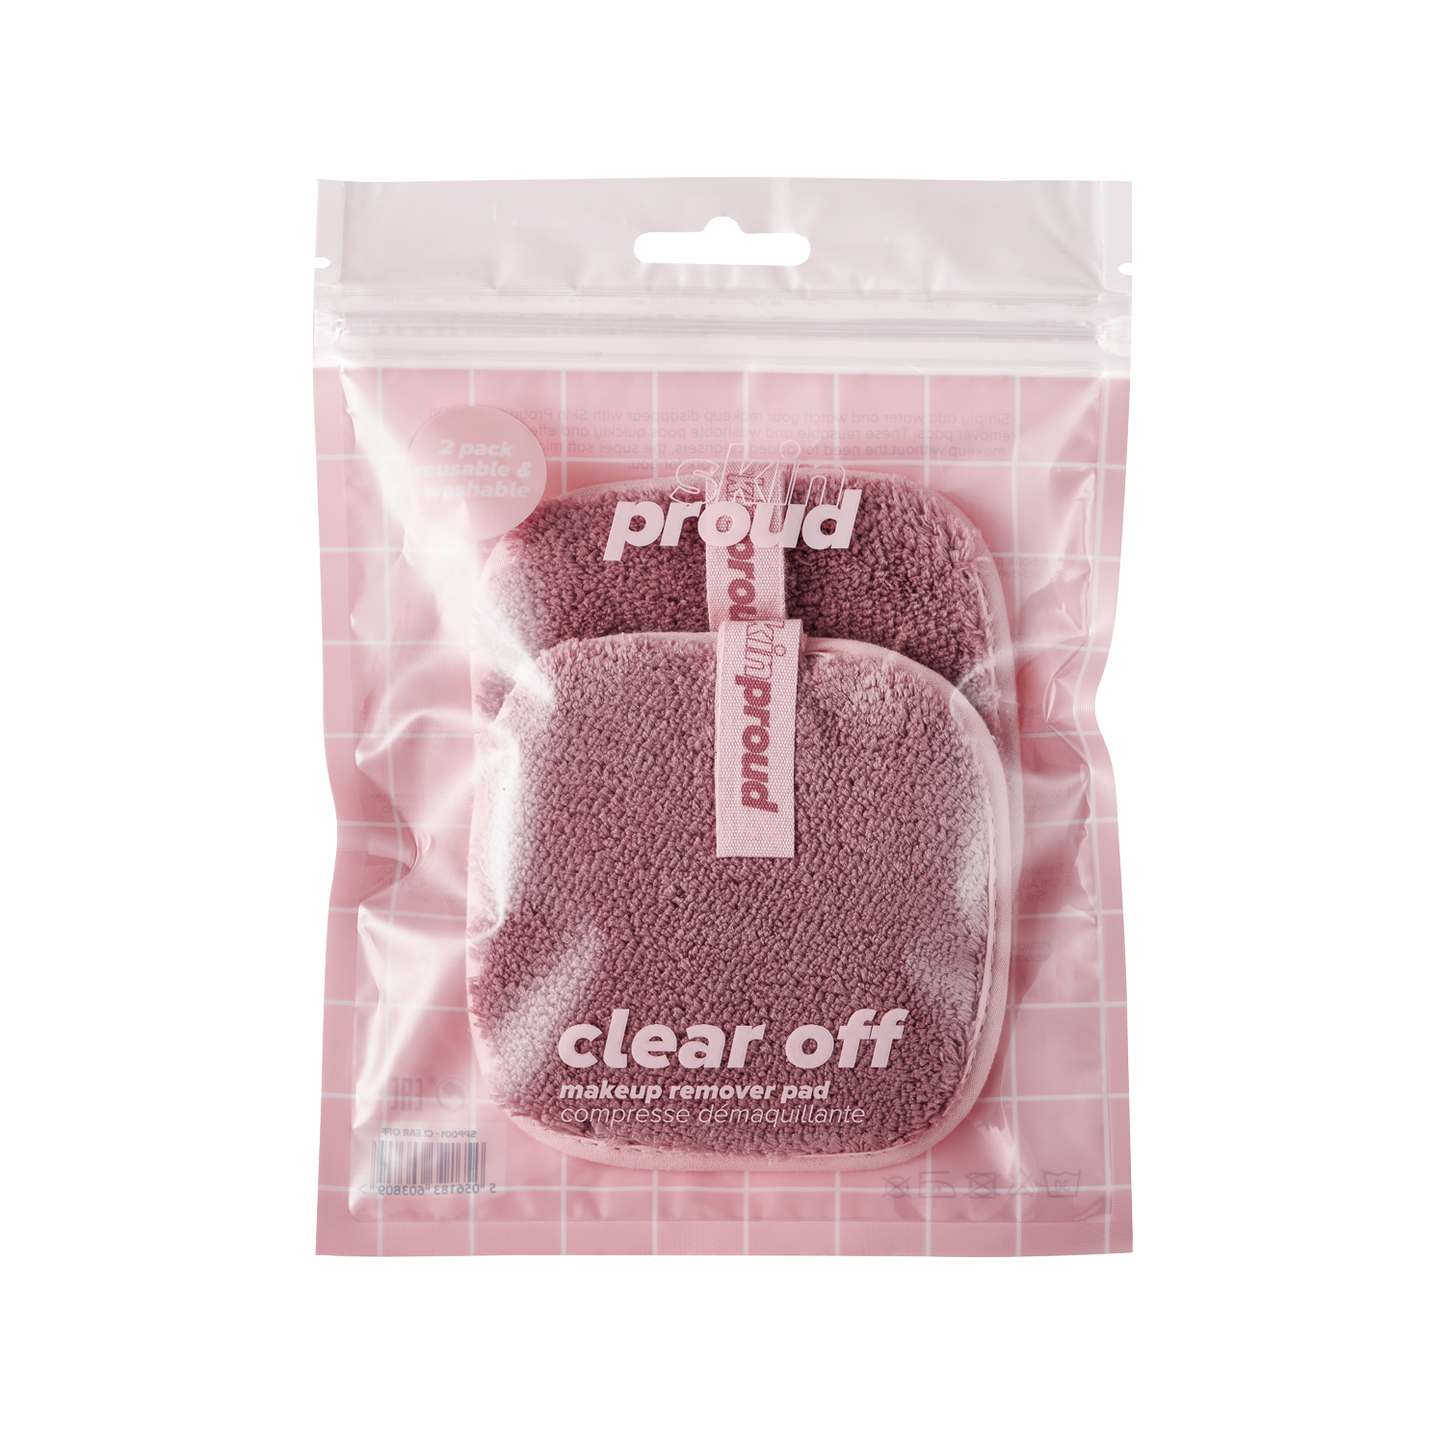 Clear off makeup remover pads 2 τεμαχια